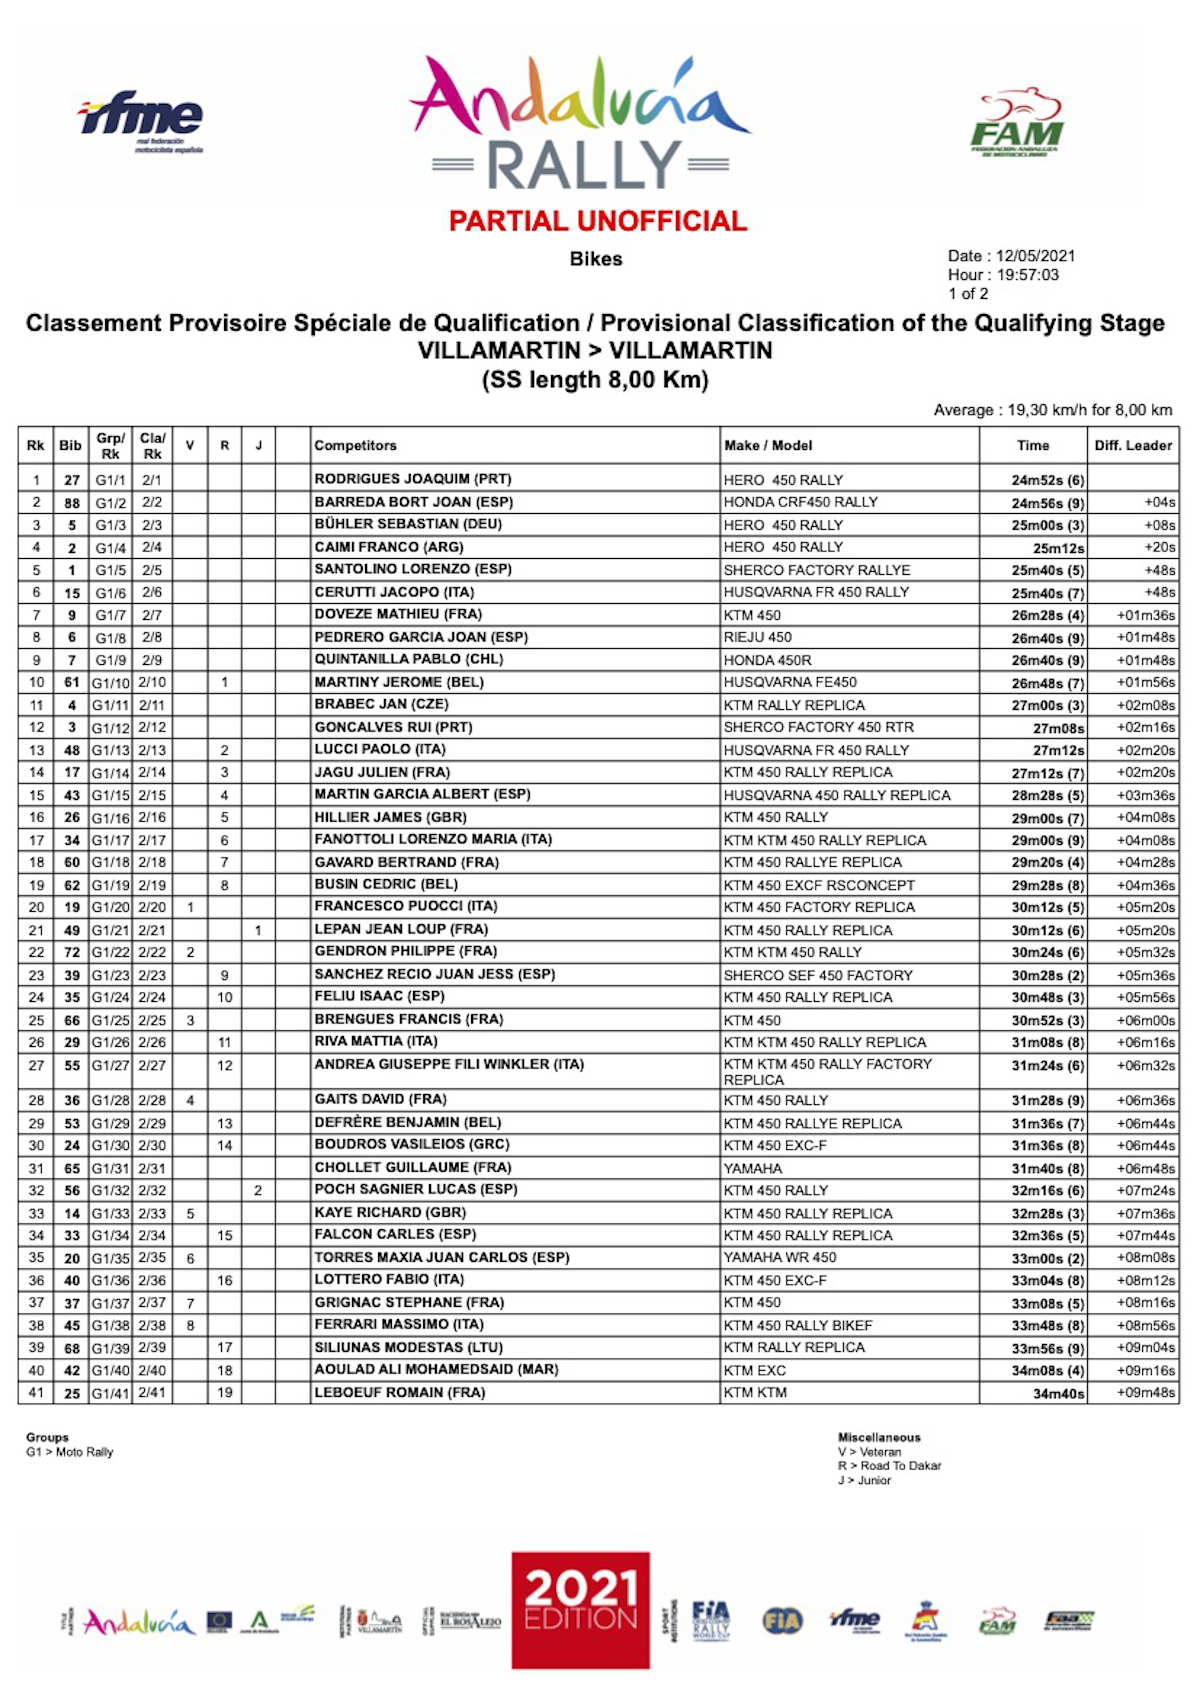 andalucia-rally-results-1